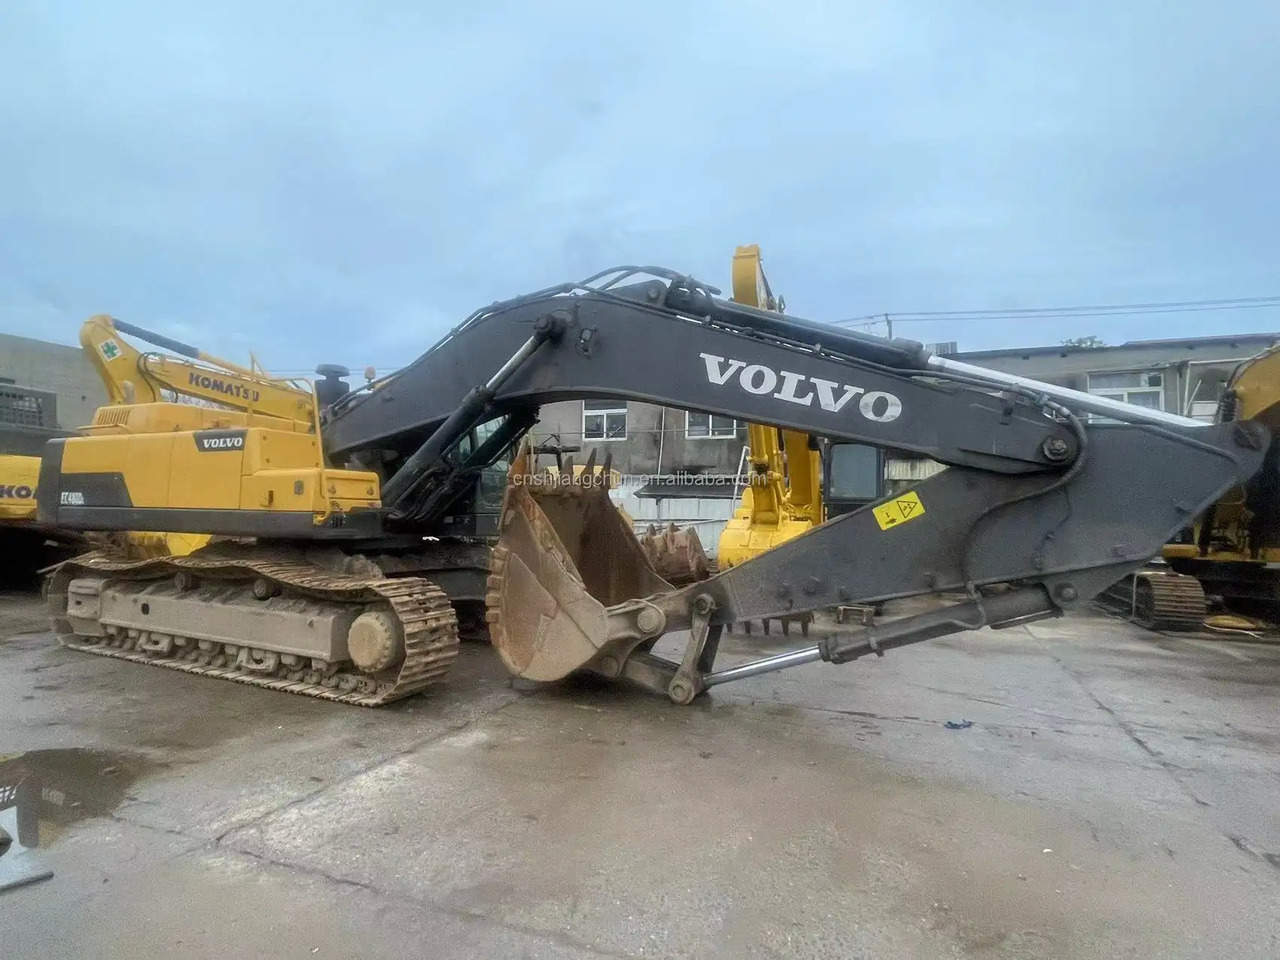 Máy xúc bánh xích New arrival second hand  hot selling Excavator construction machinery parts used excavator used  Volvo EC480D  in stock for sale: hình 2